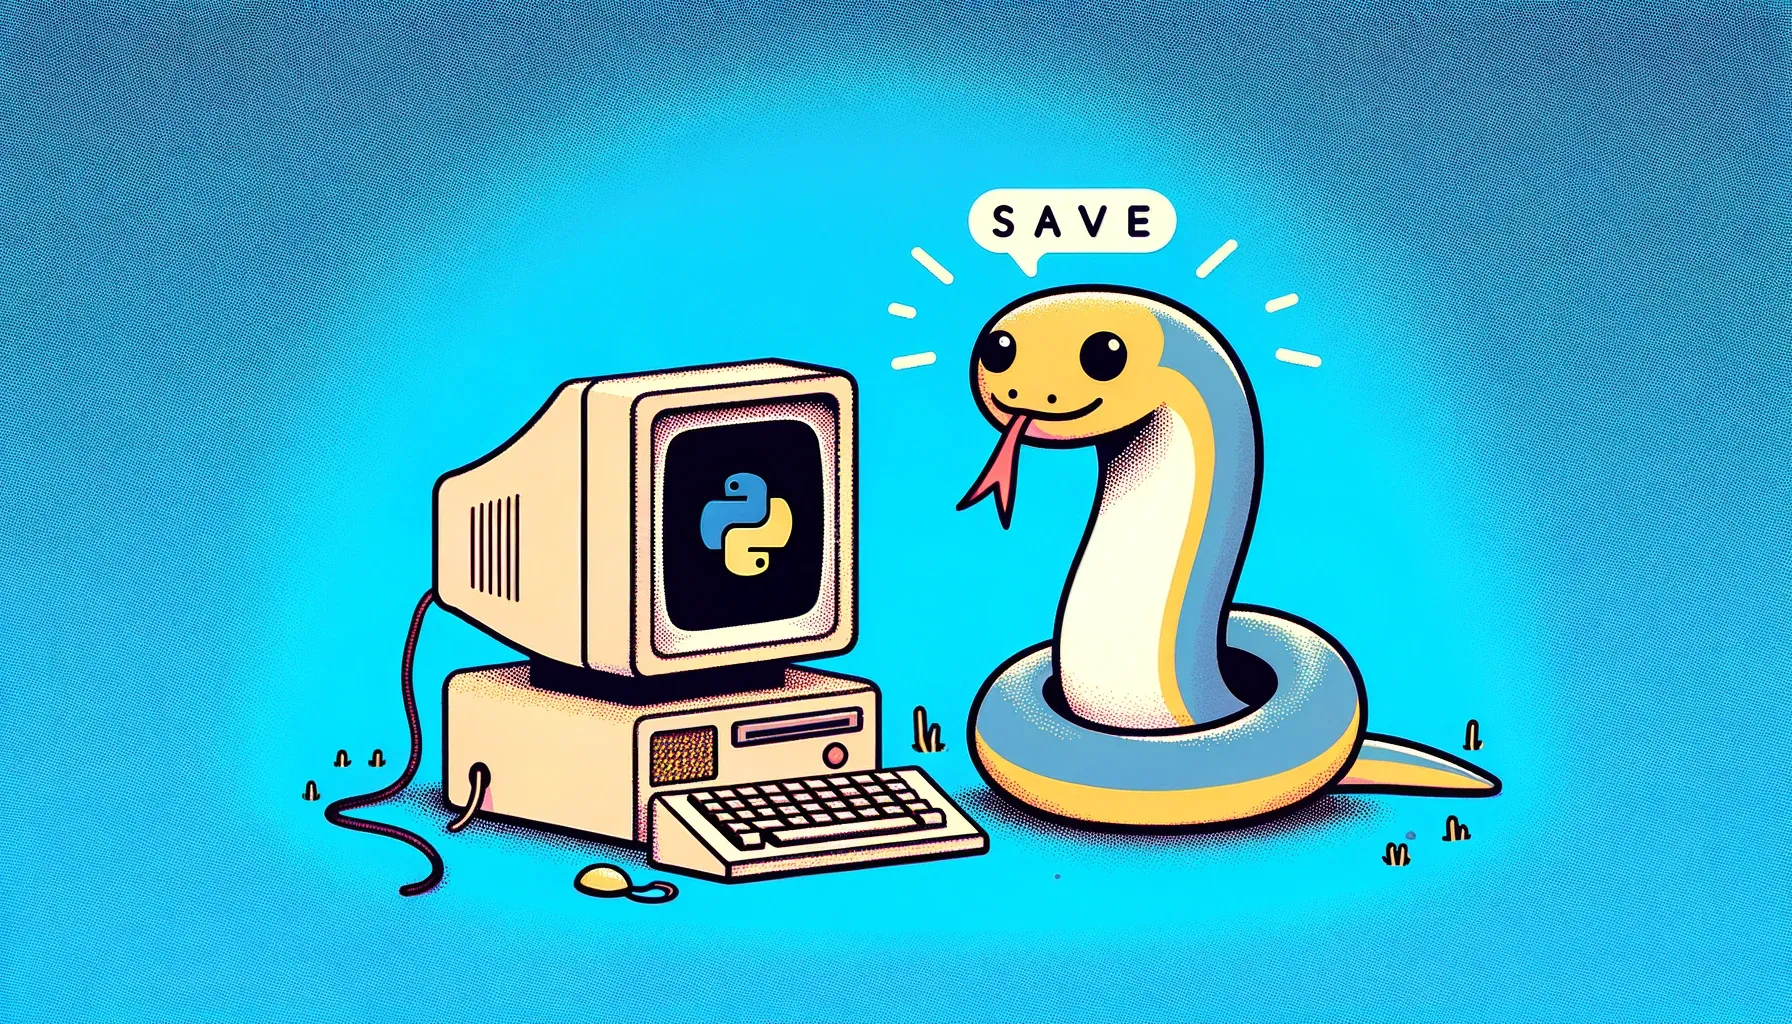 Save images with Python